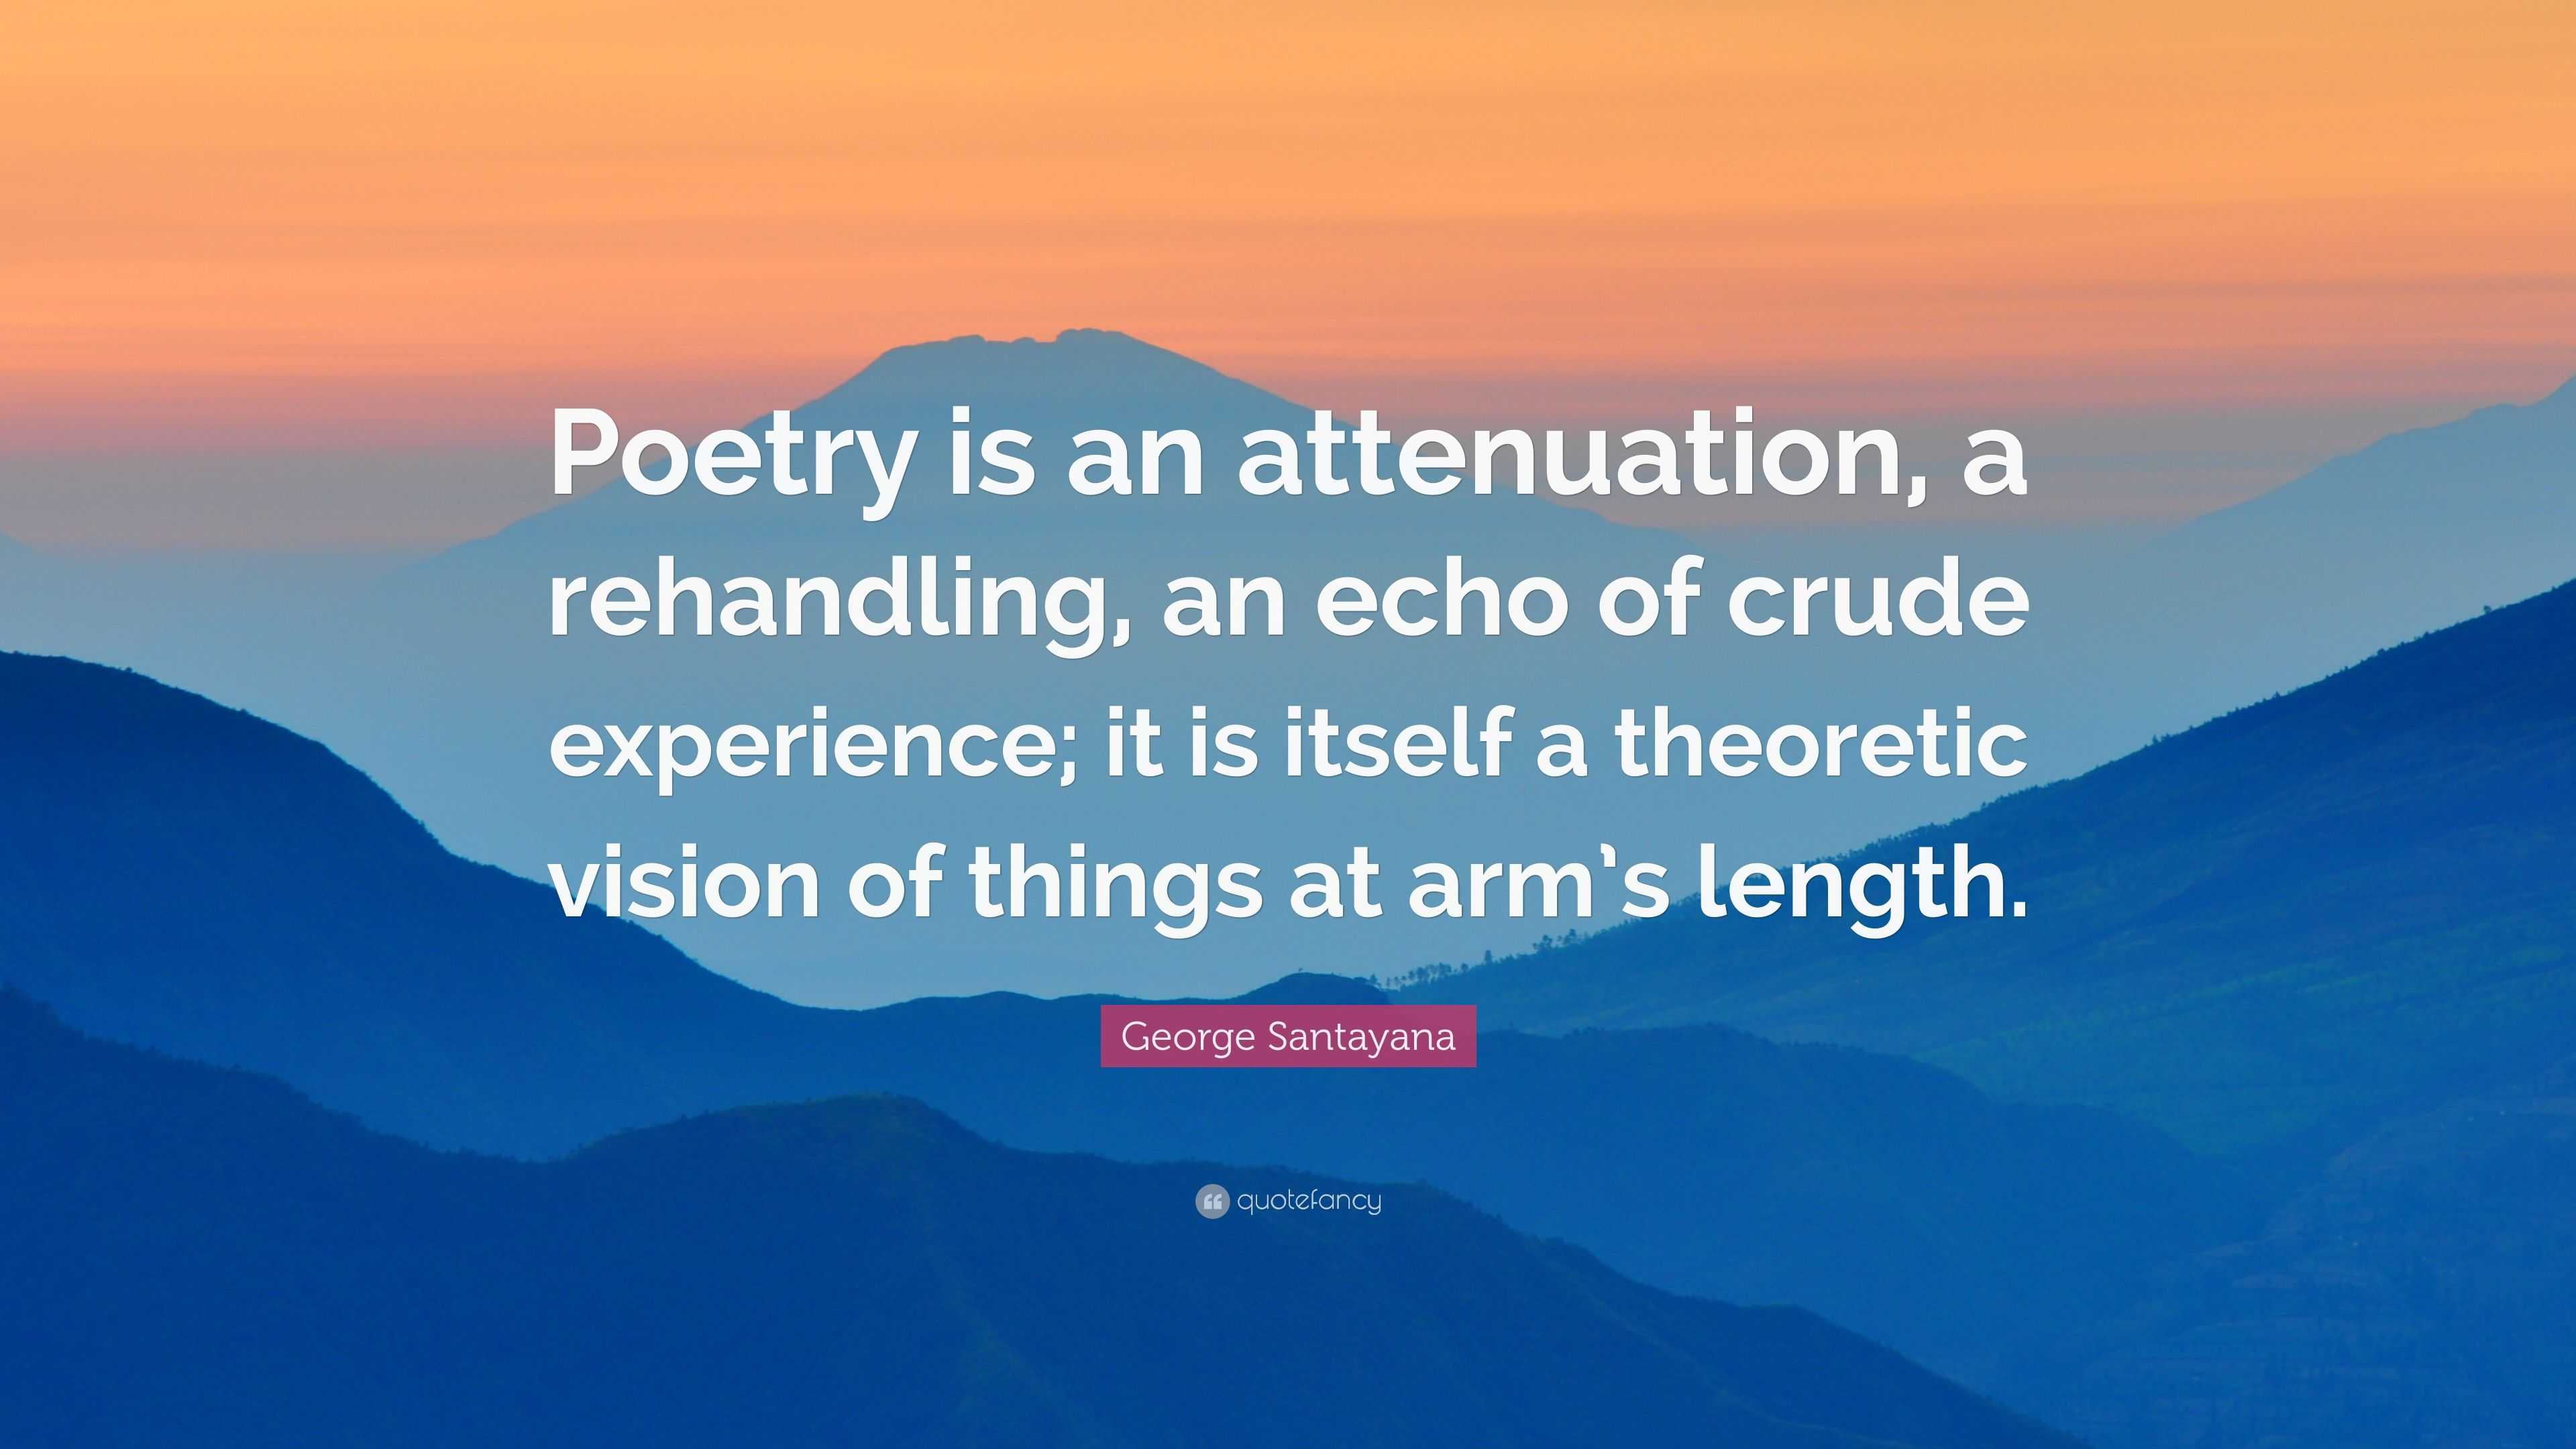 George Santayana Quote: “Poetry is an attenuation, a rehandling, an ...